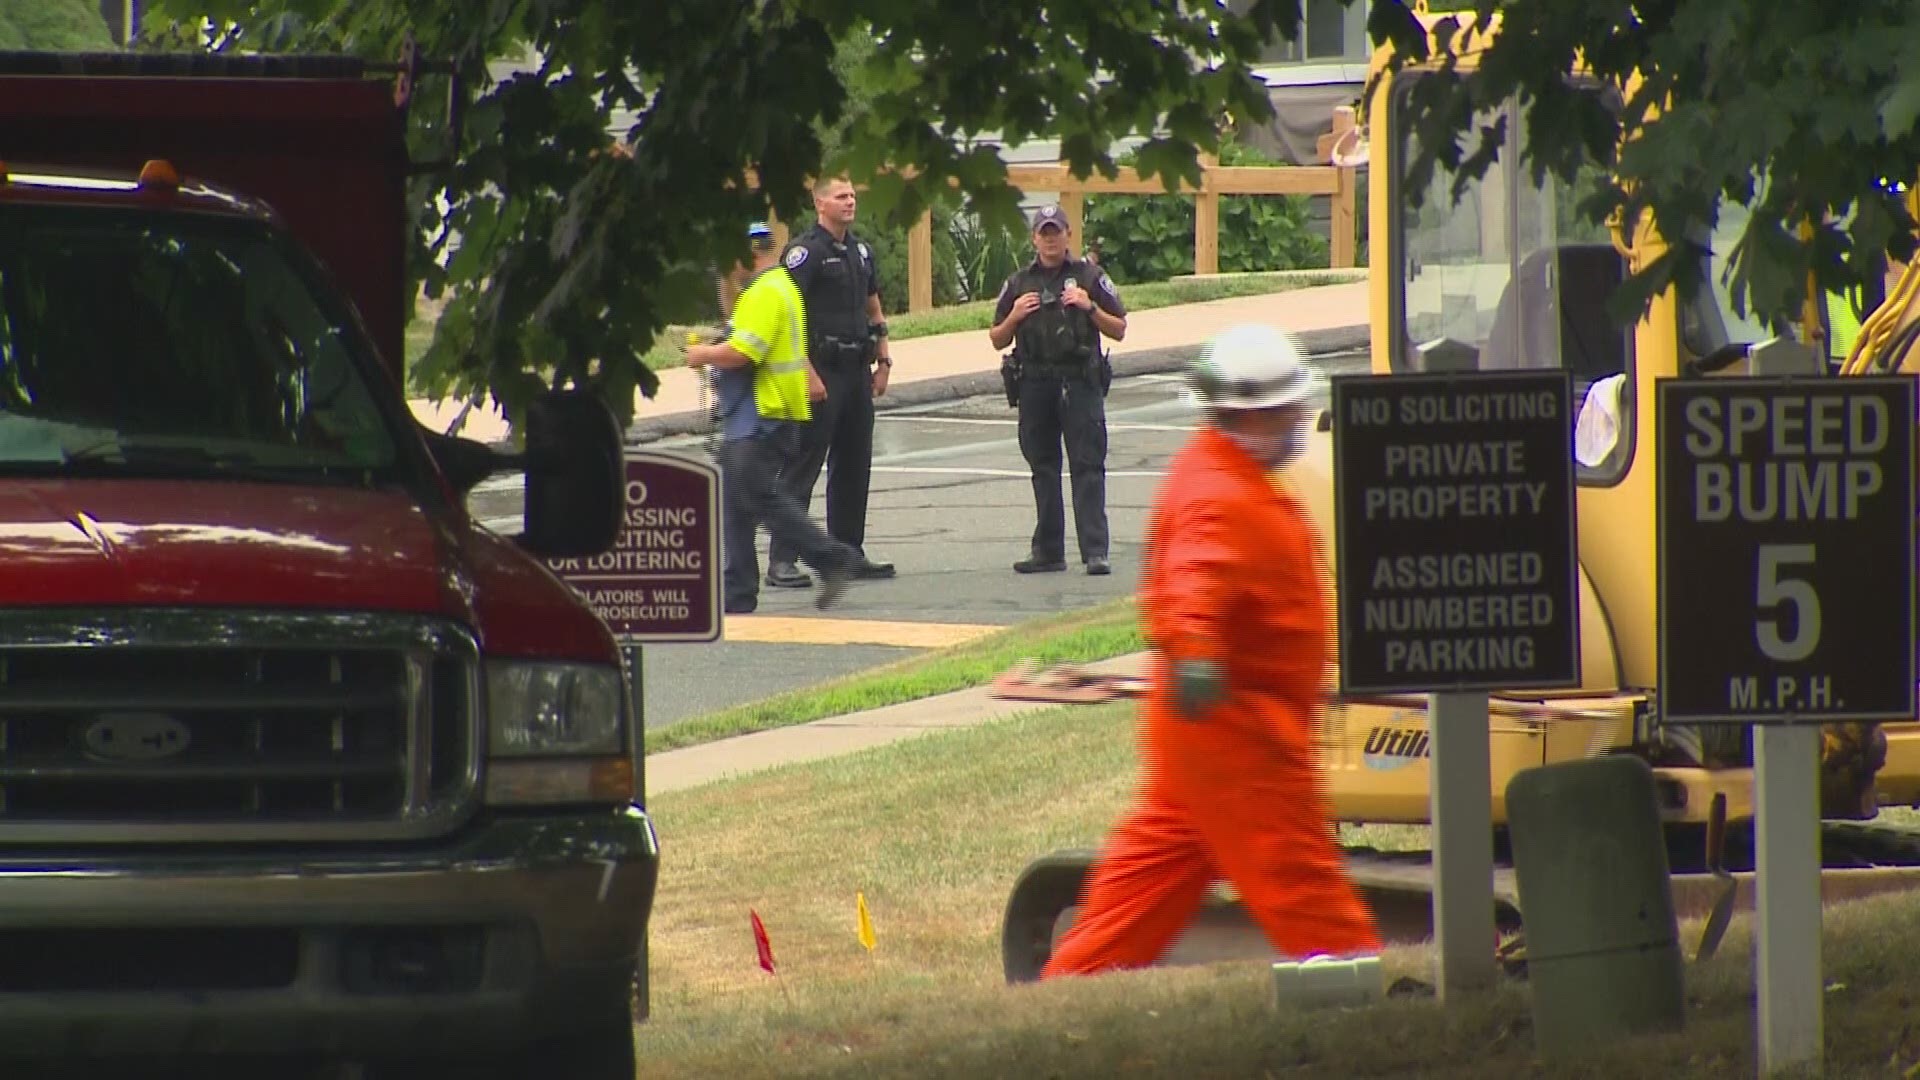 Firefighters say a construction grew struck a gas line, leading to the emergency.